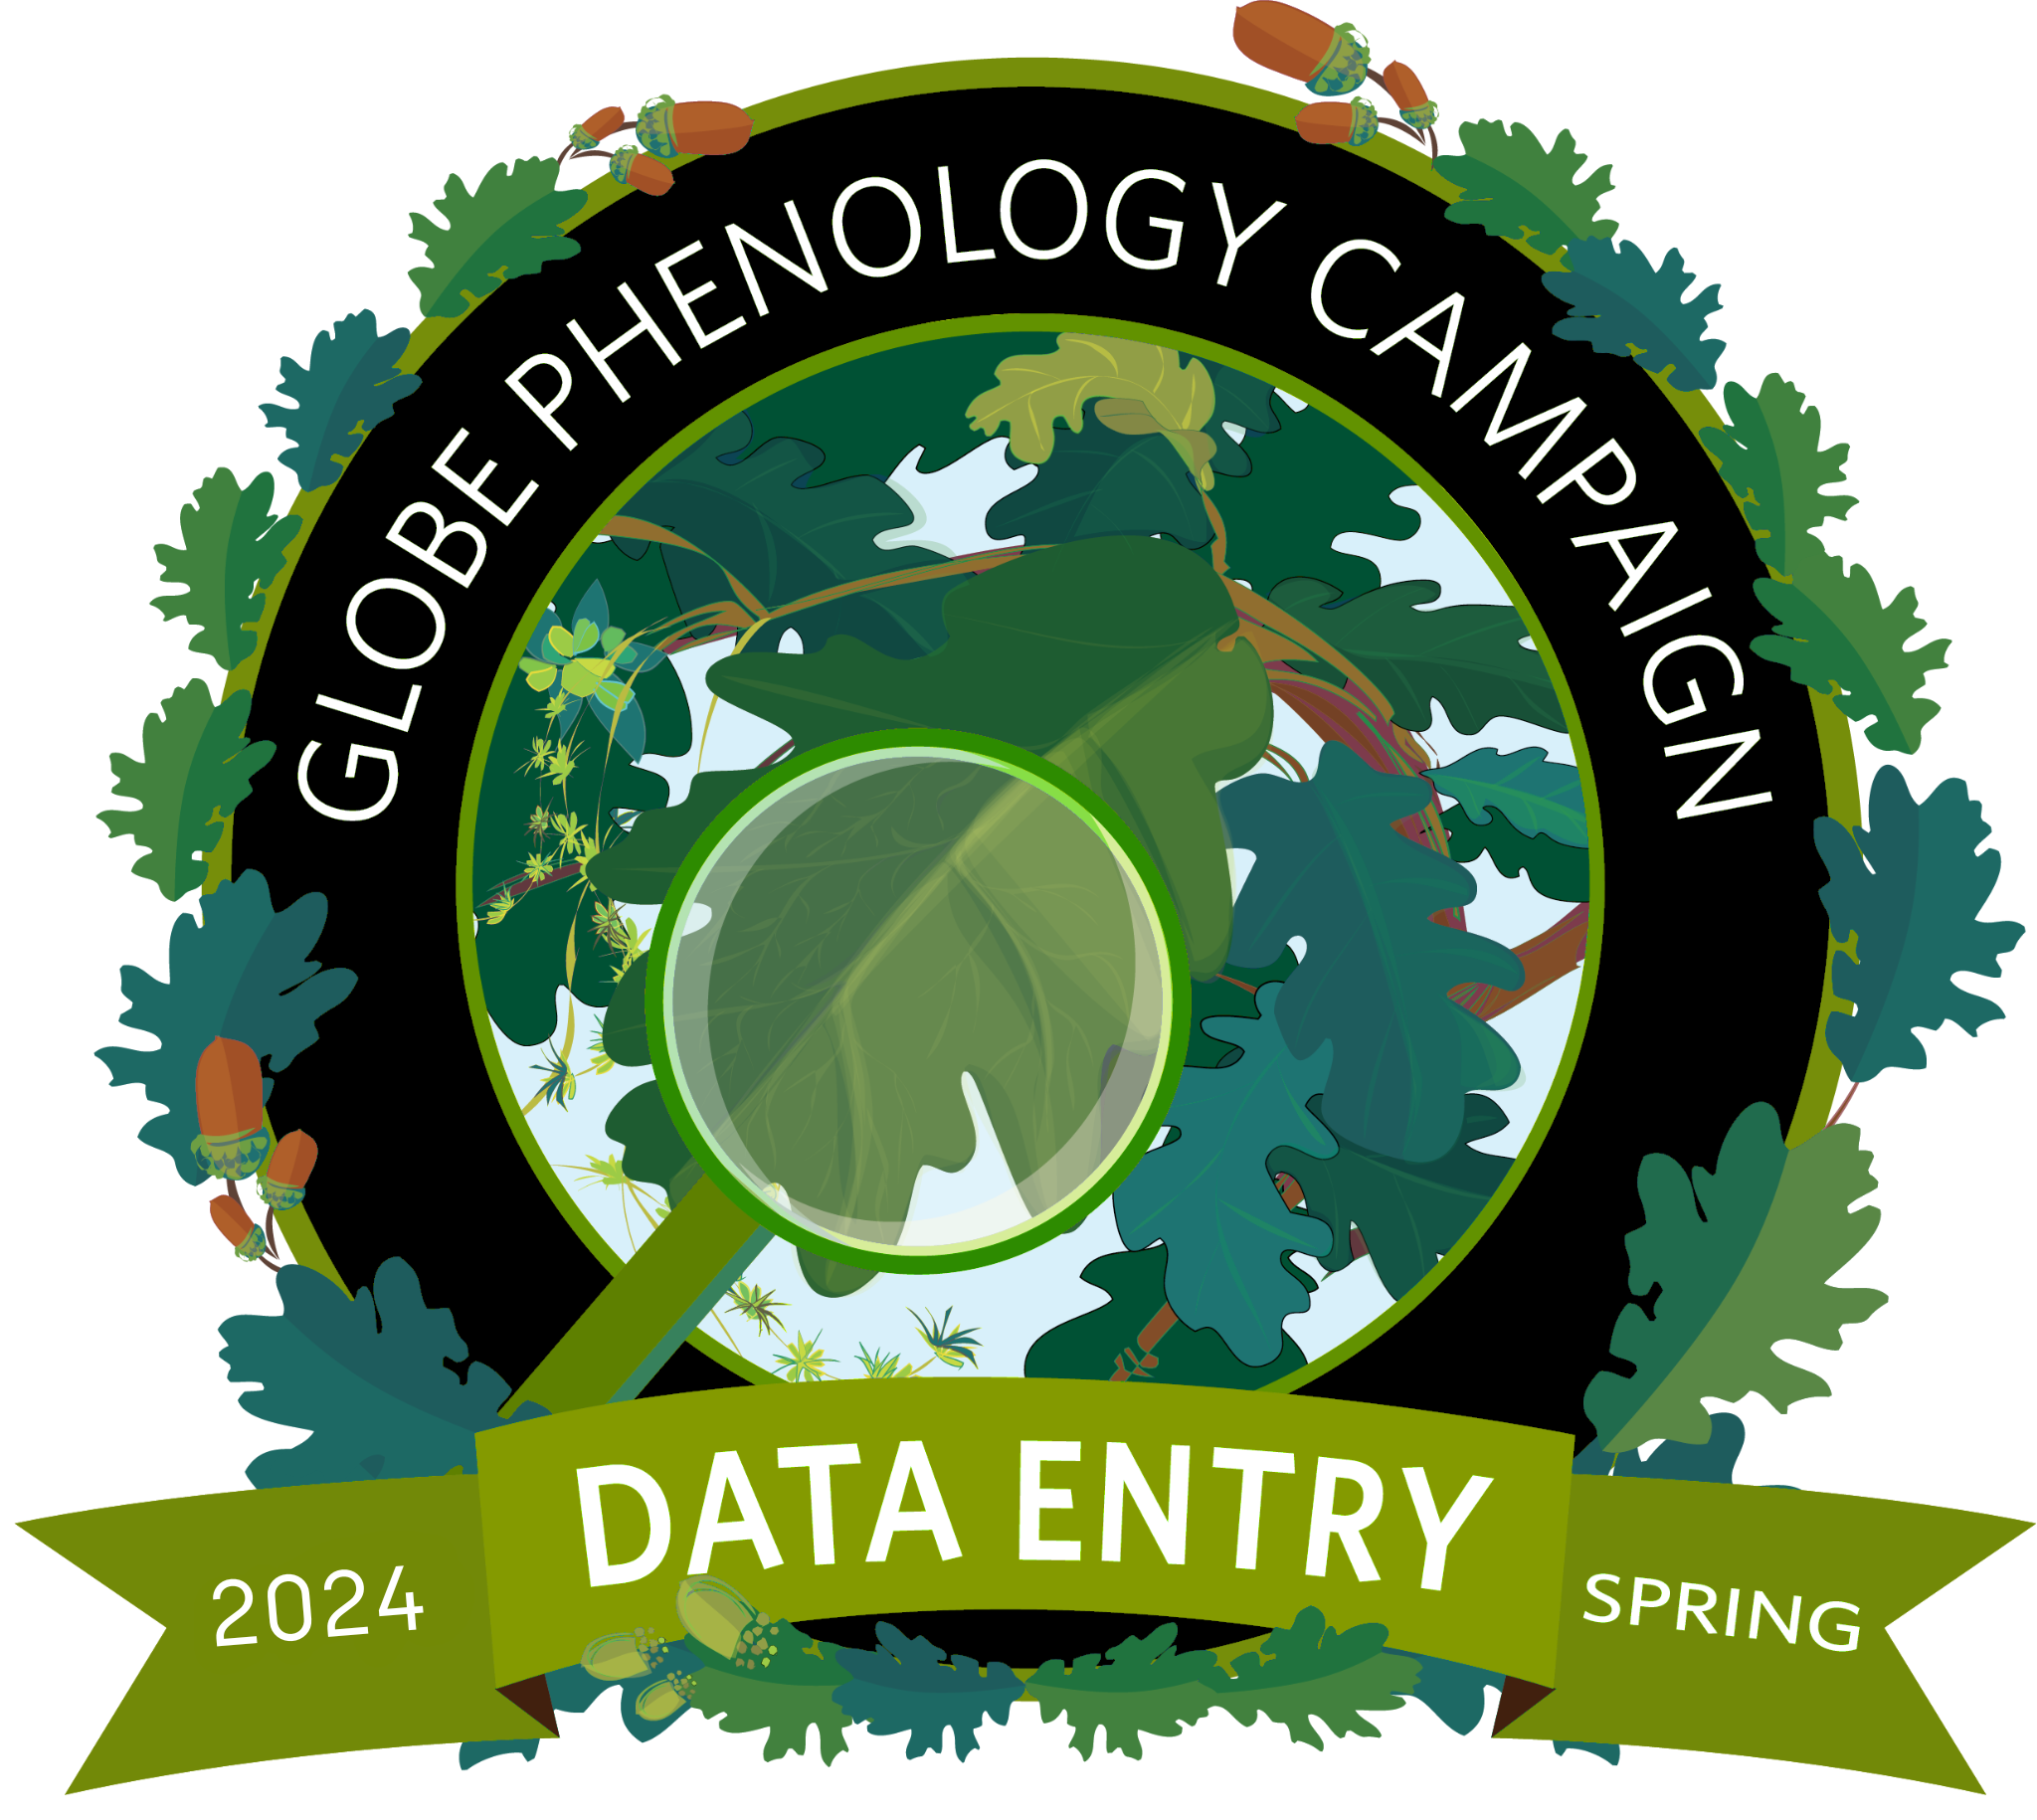 phenology campaign data entry badge 2024